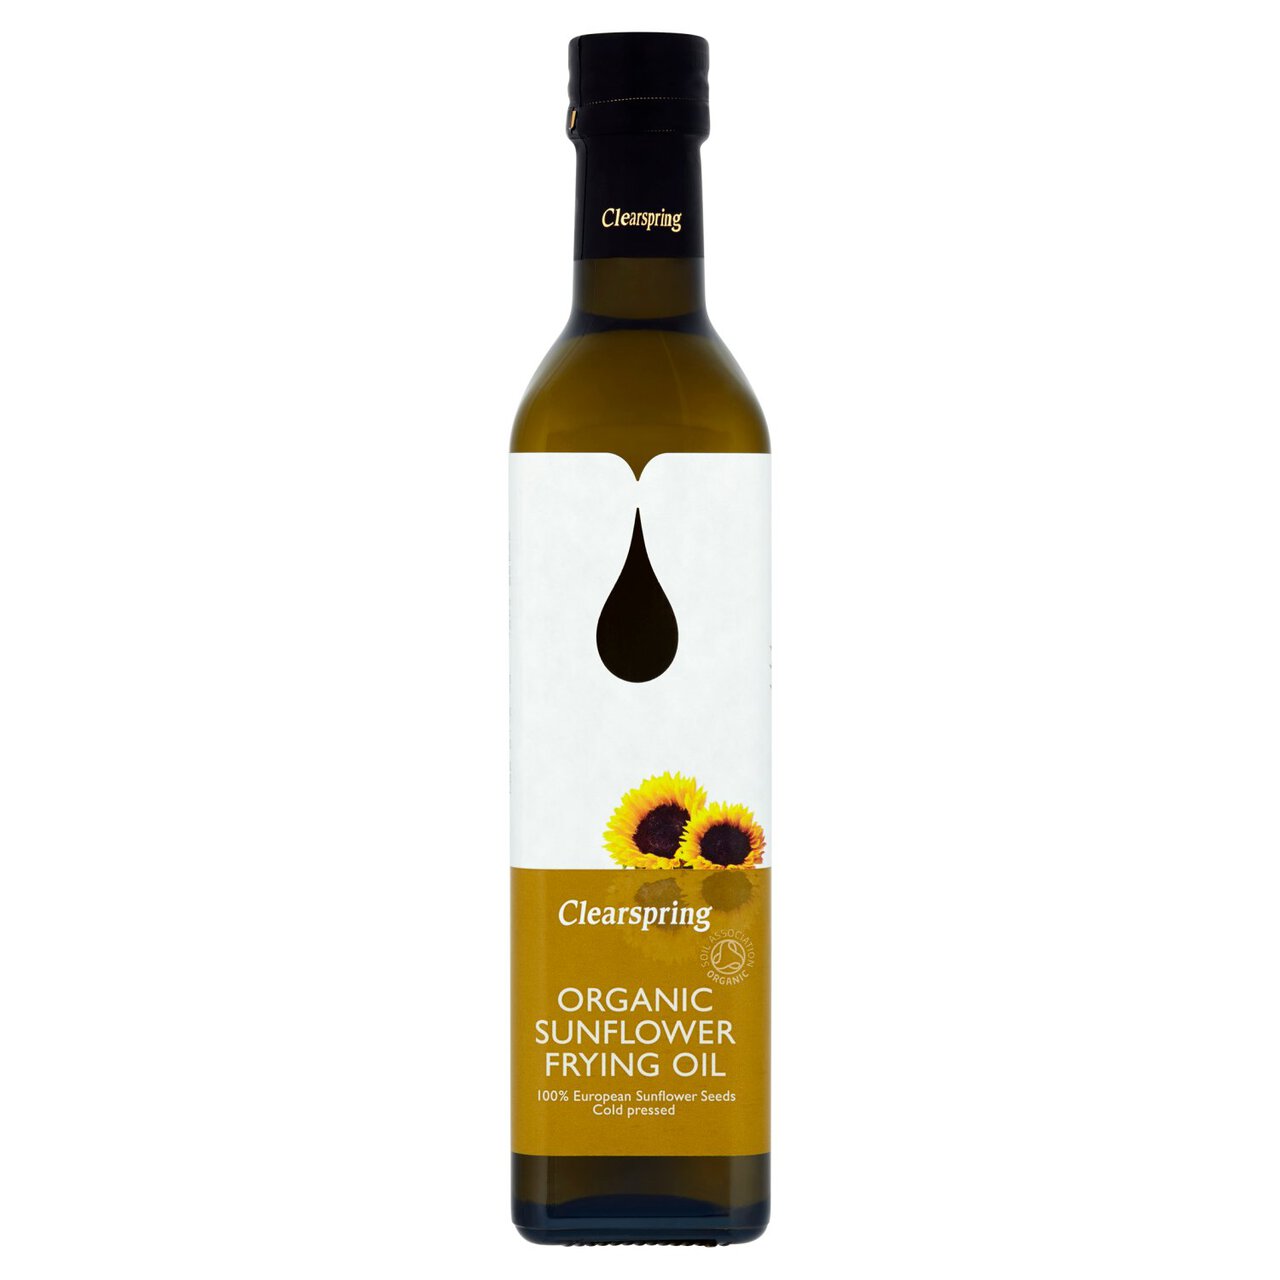 Clearspring Organic Sunflower Frying Oil 500ml